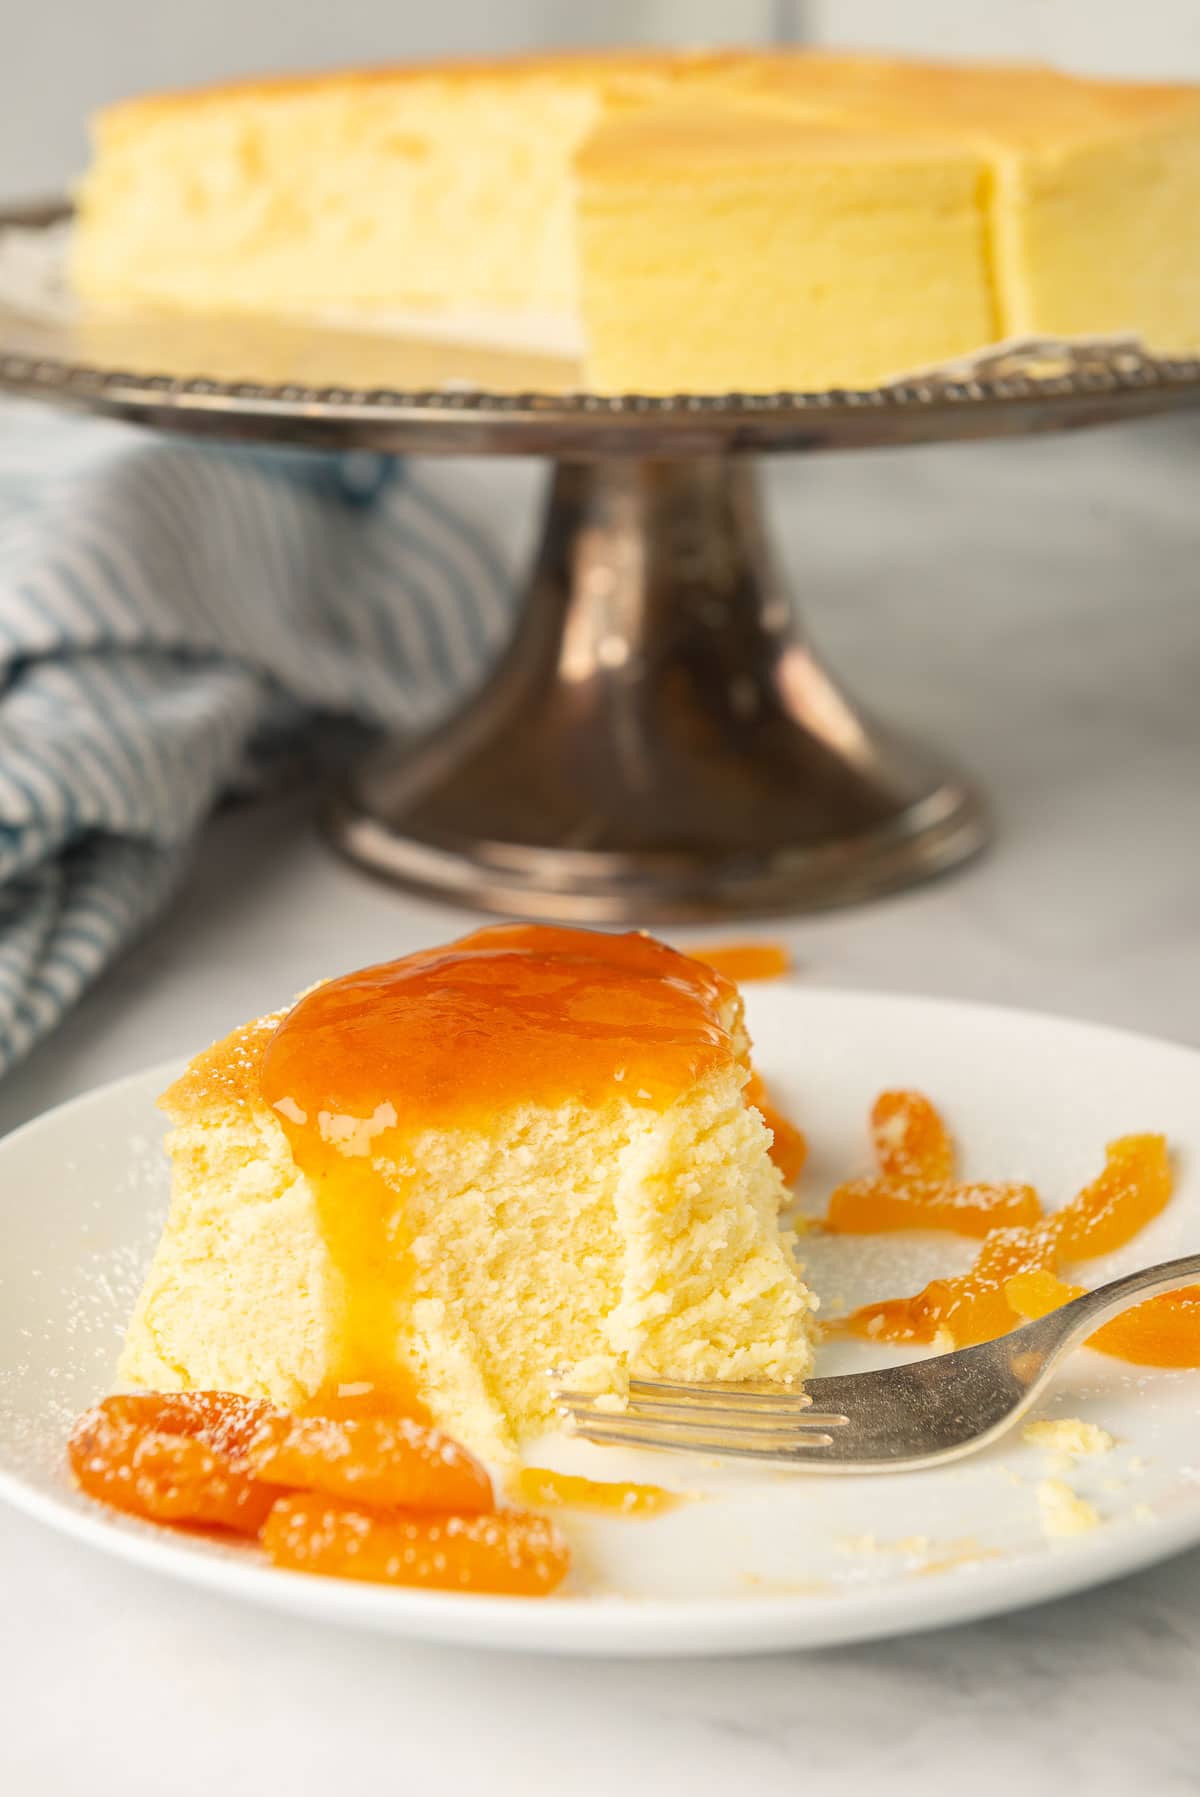 A half-eaten slice of Japanese cotton cheesecake that's been glazed with apricot sauce, a bits of sliced apricot.